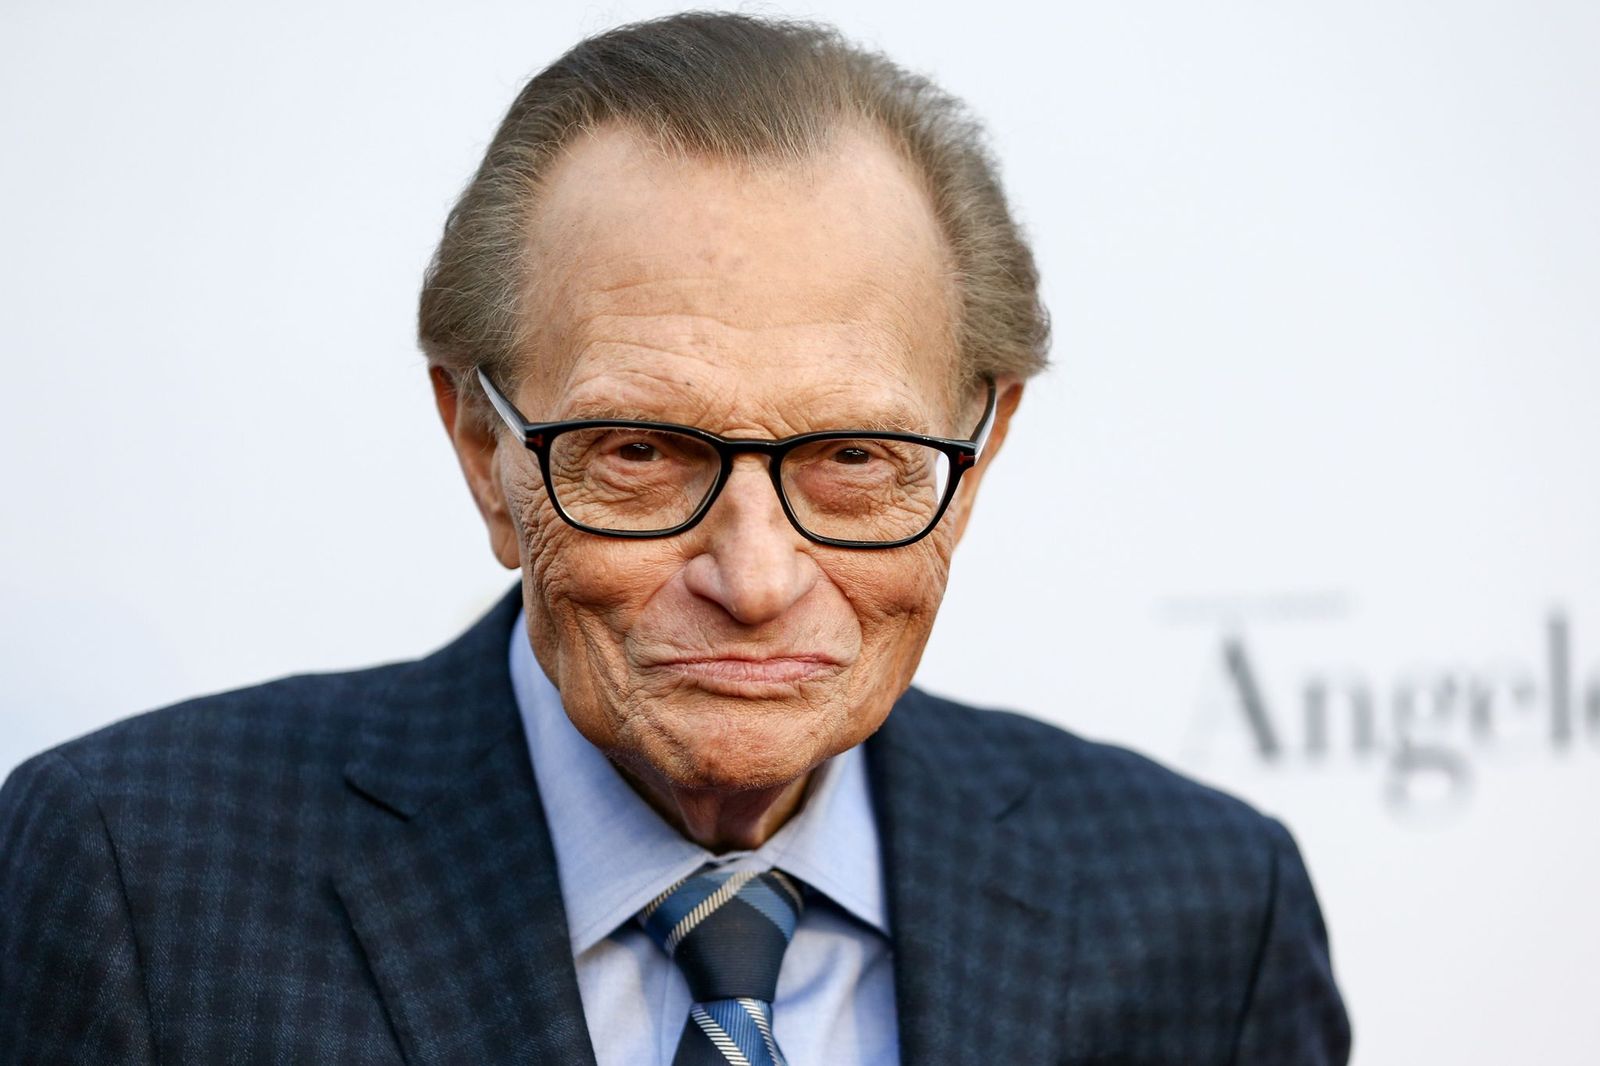 Larry King at his 60th Broadcasting Anniversary Event at HYDE Sunset: Kitchen + Cocktails on May 1, 2017 in West Hollywood, California. | Photo: Getty Images